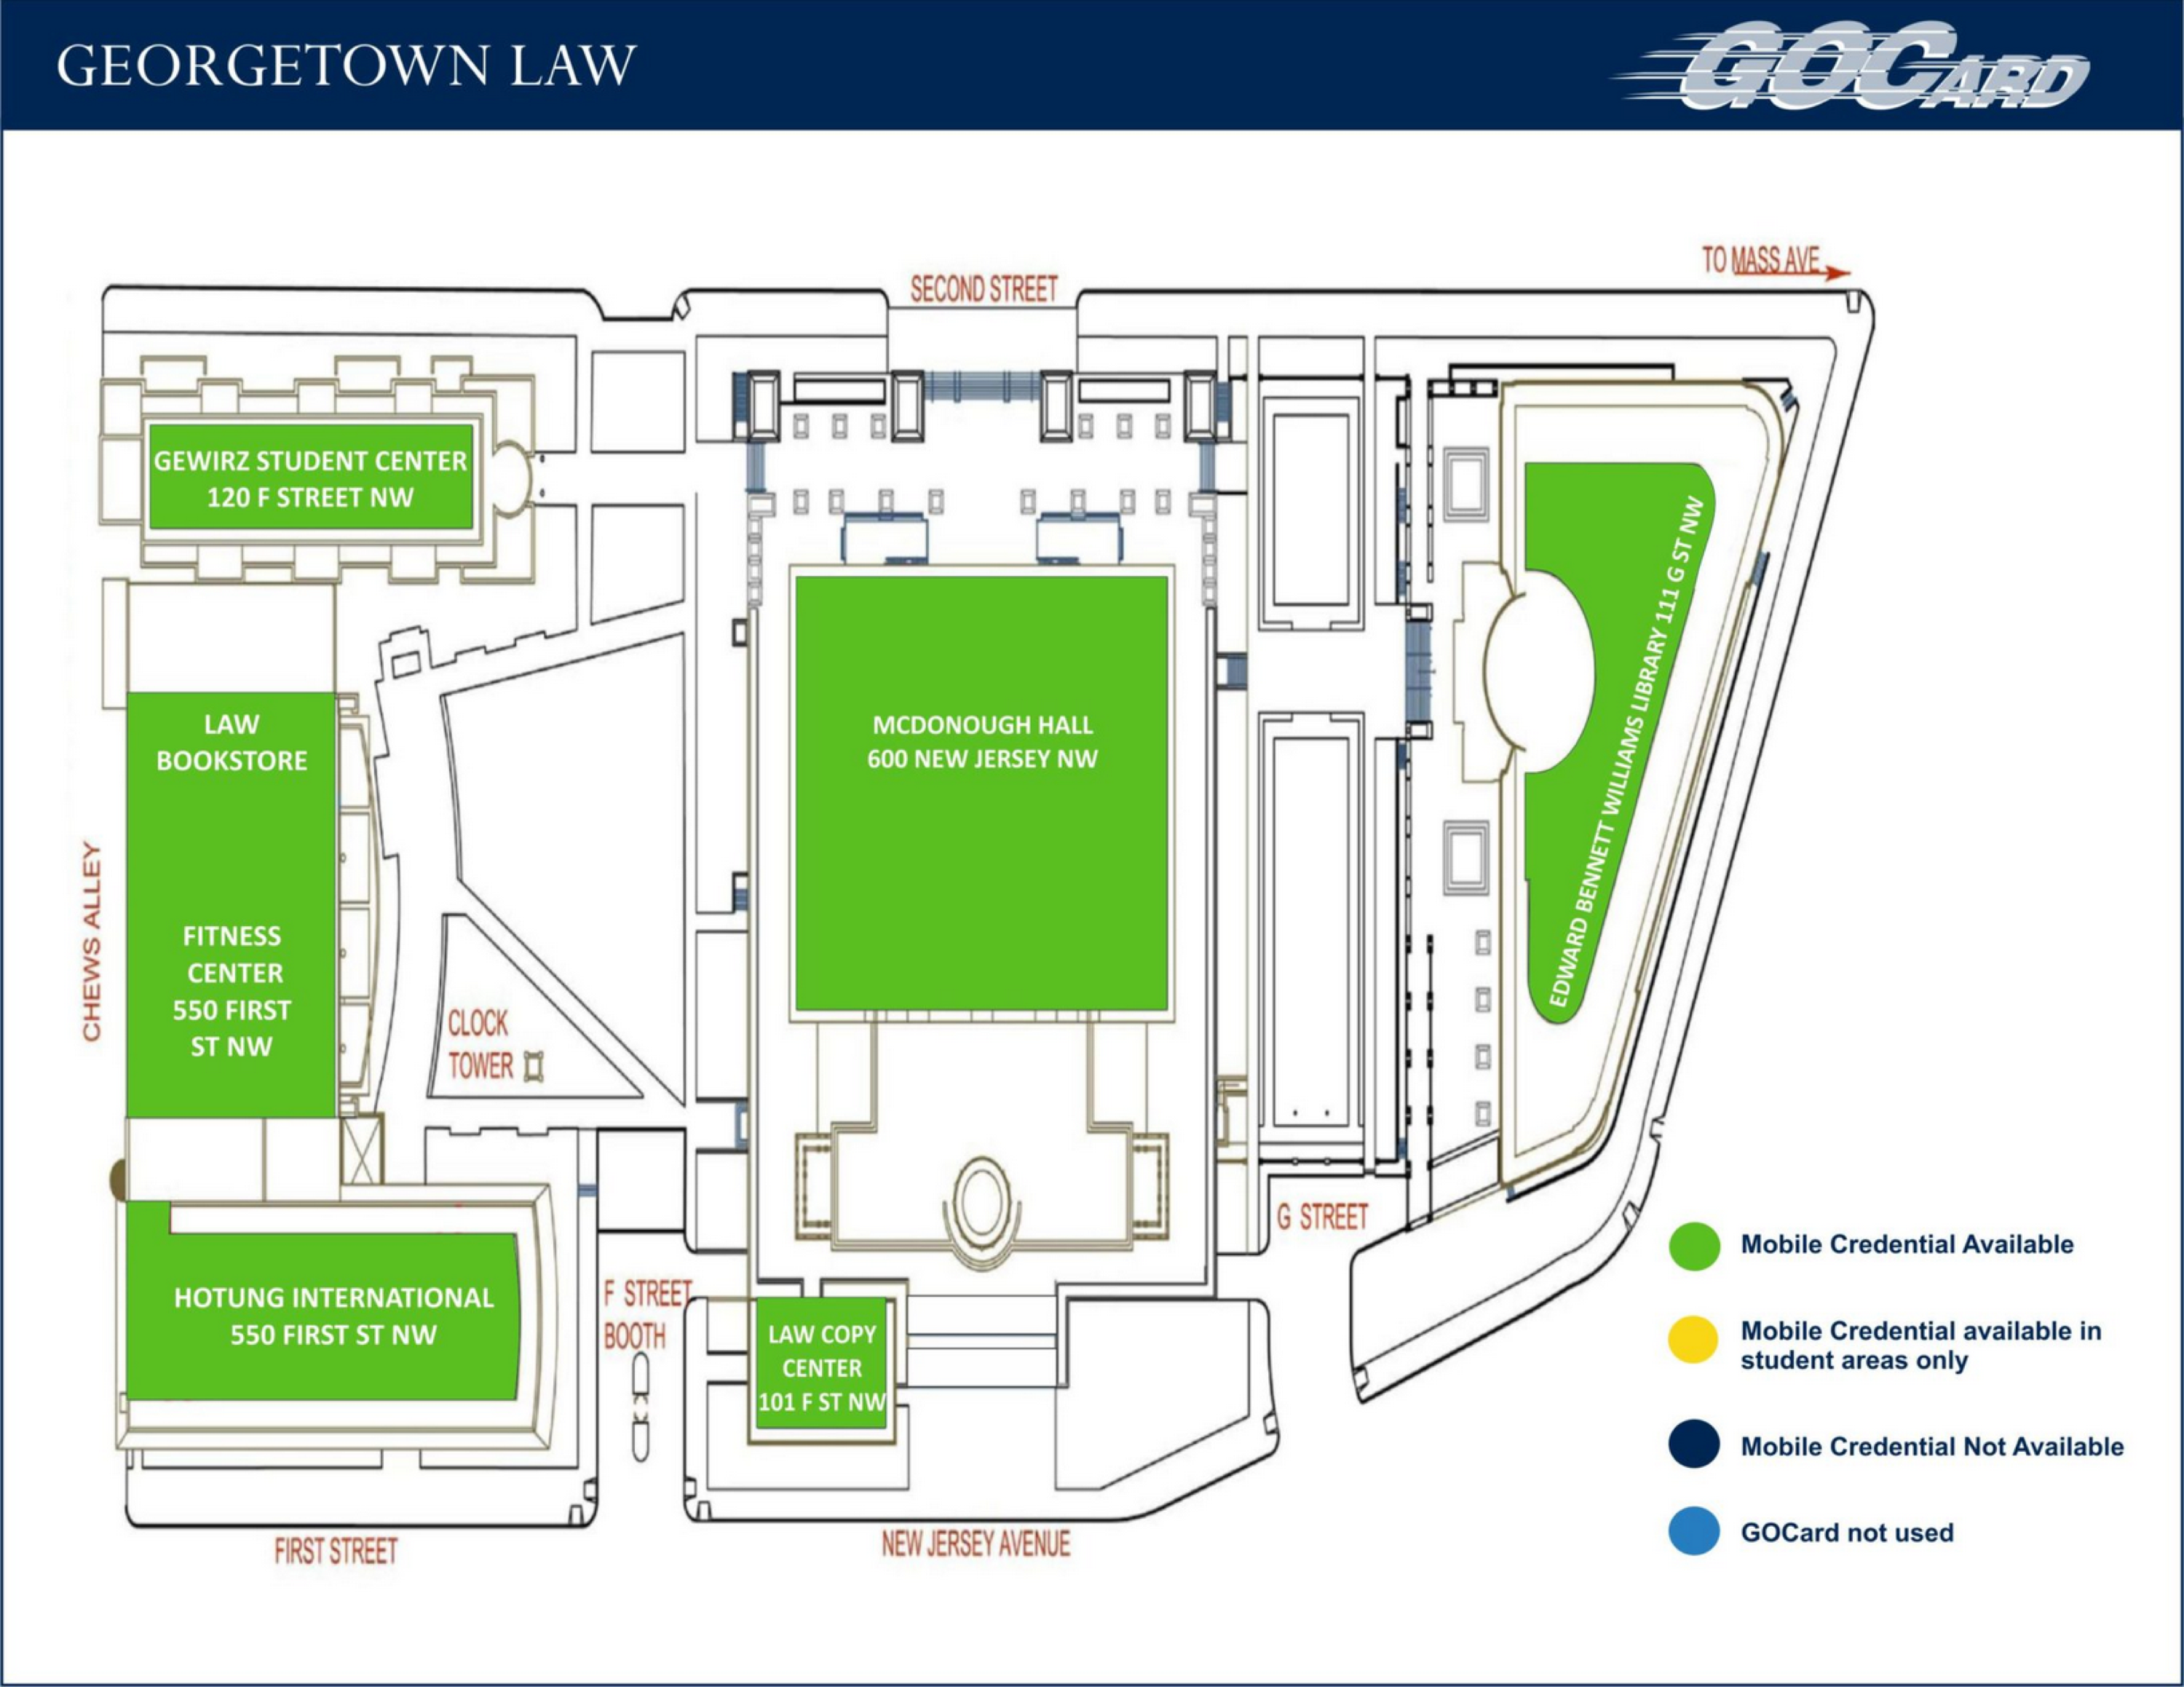 Map of where you can use GOCard (Law Center)